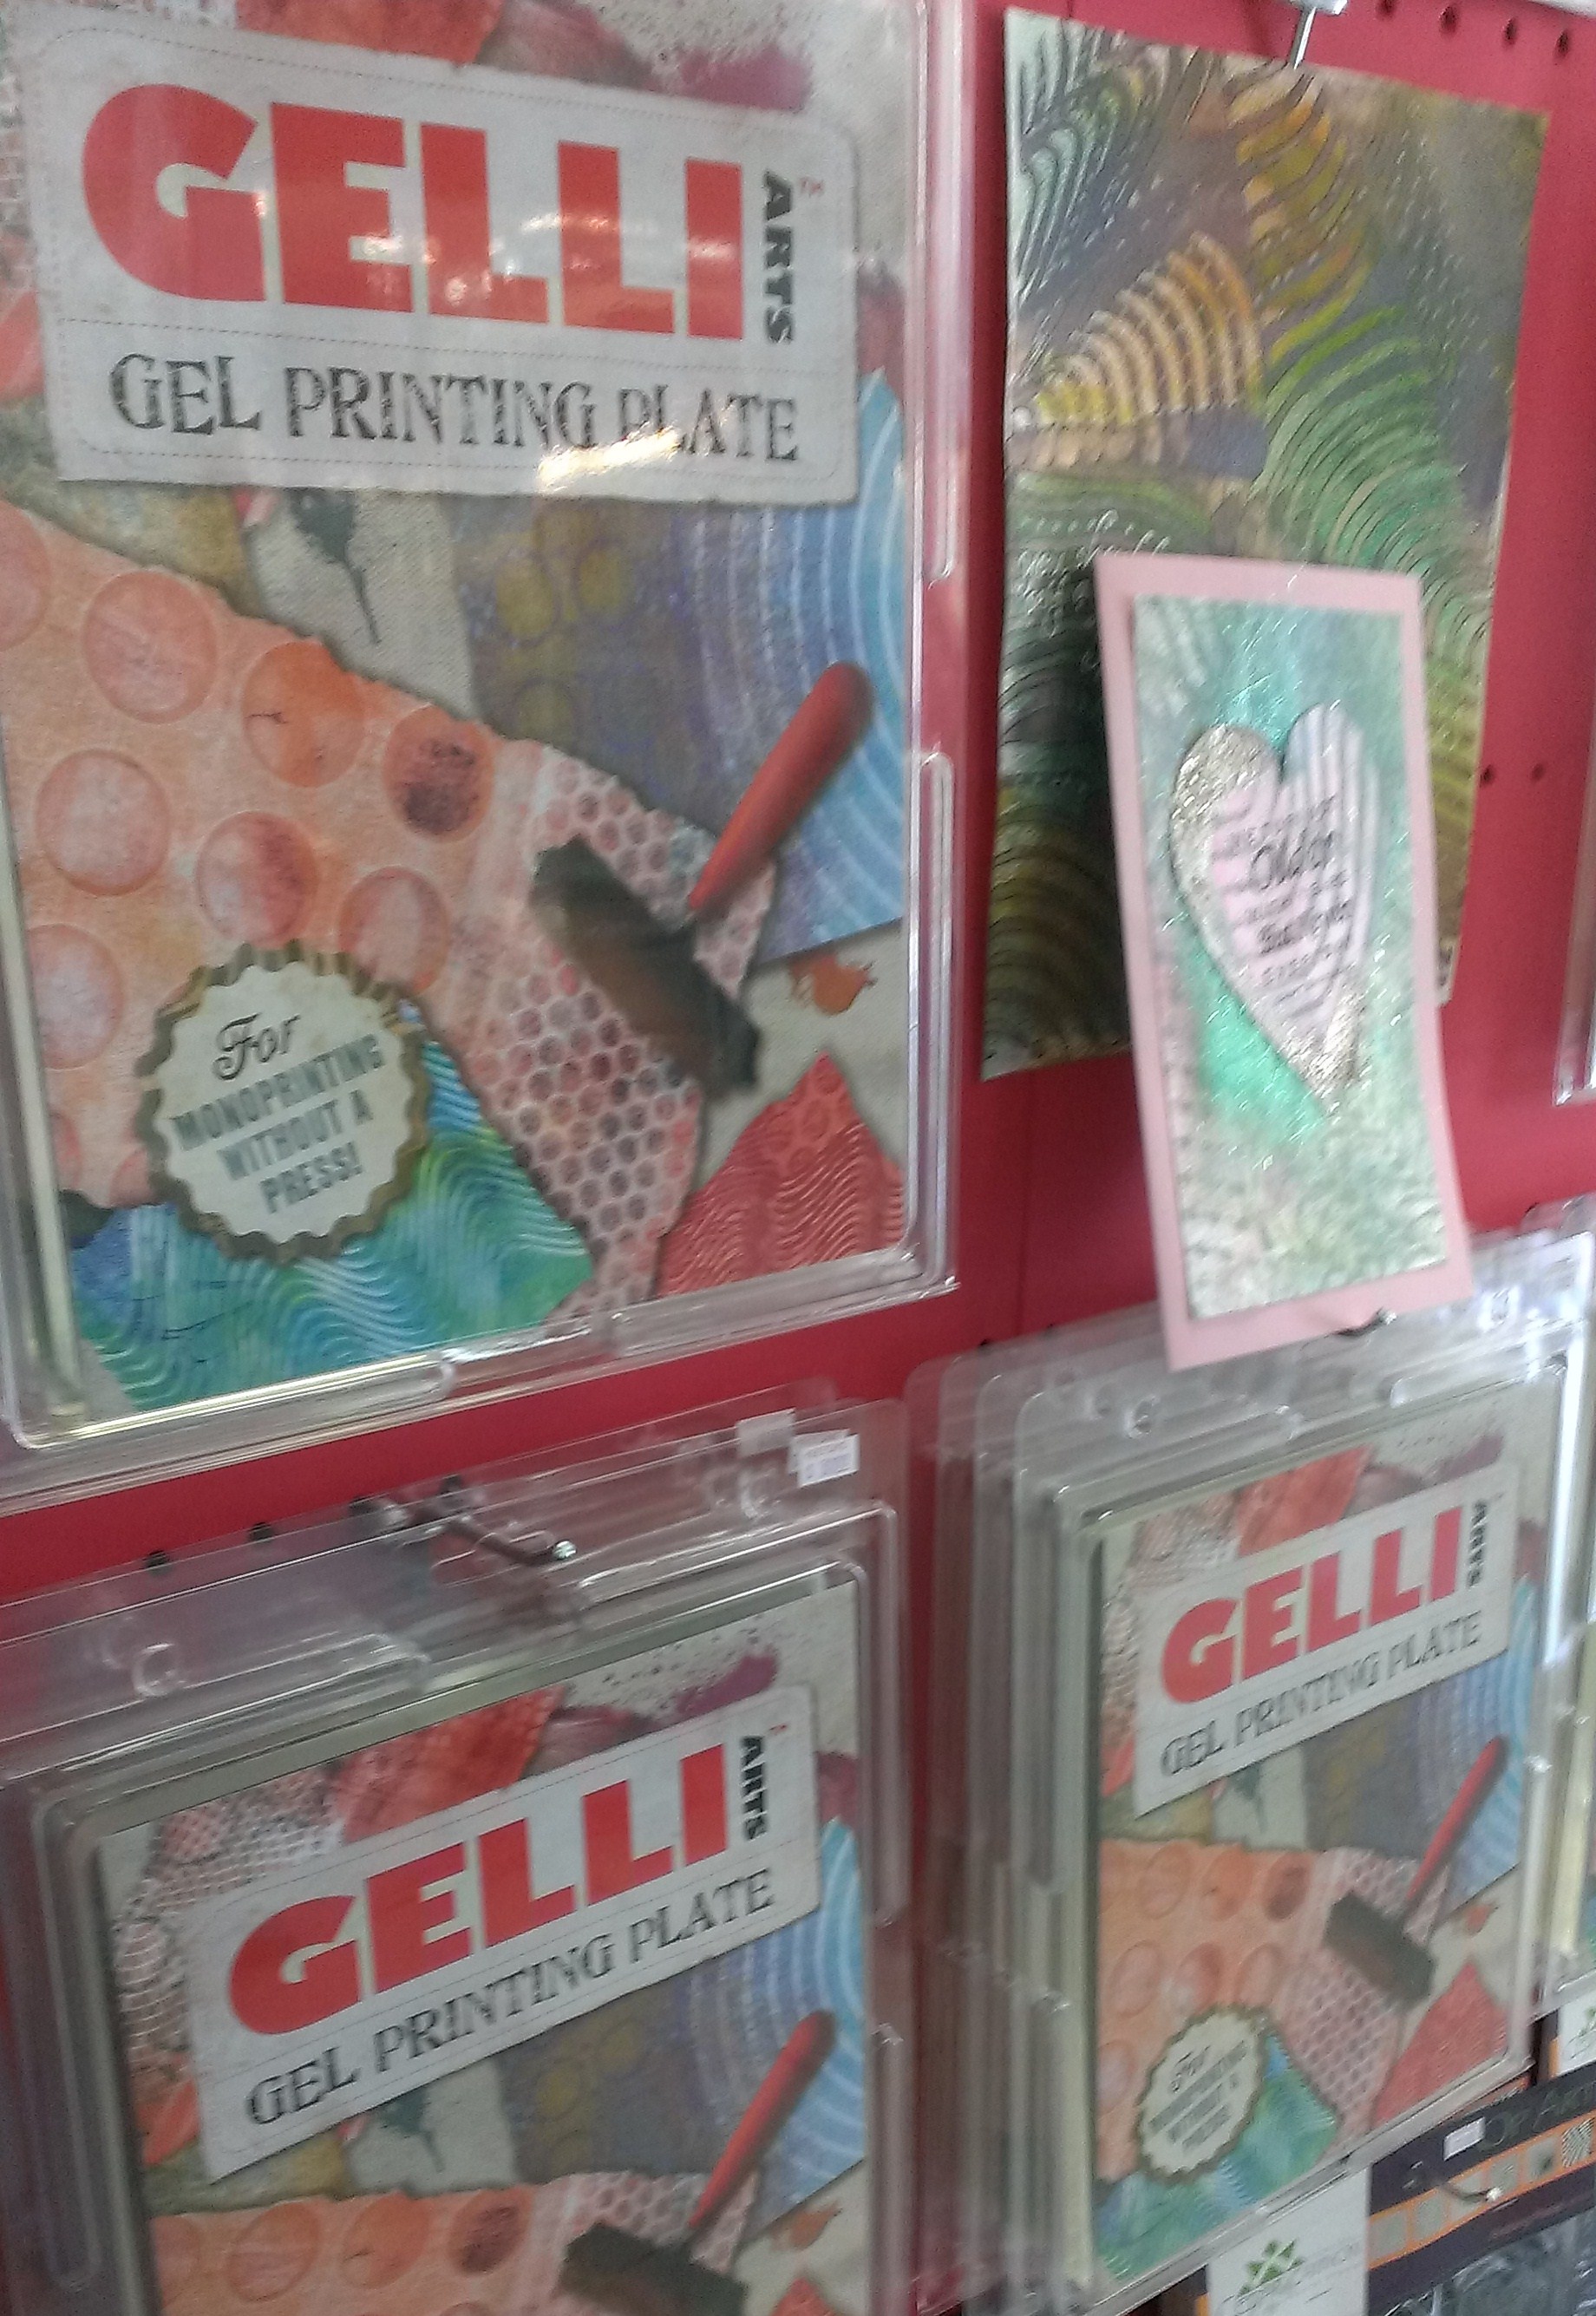 All about Gelli Plates and How to Use Them, Art Inspiration, Inspiration, Art Techniques, Encouragement